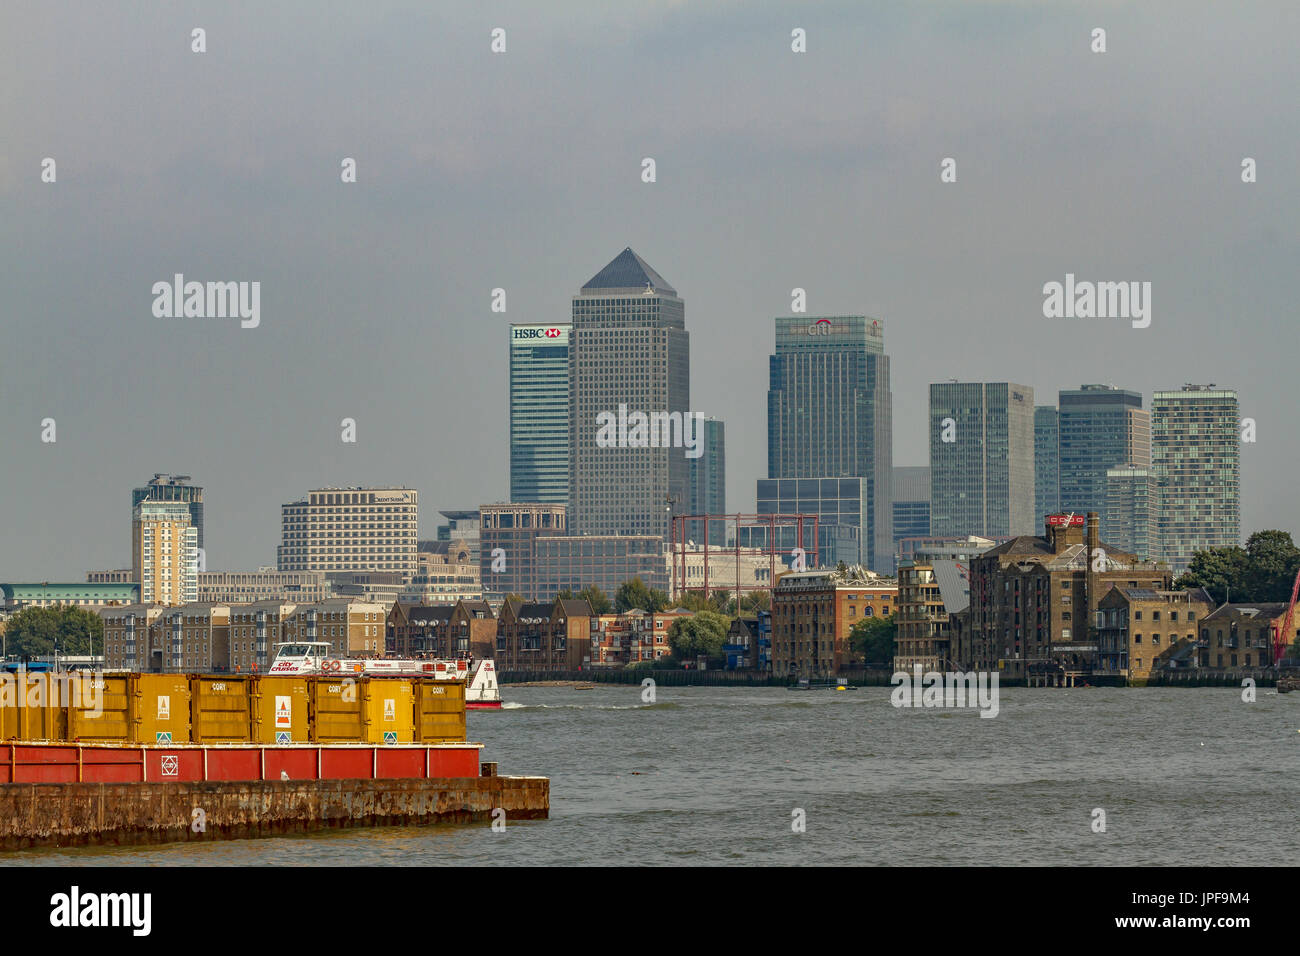 The Skyscrapers of Canary Wharf tower over The River Thames as seen from the riverbank in Bermondsey, London Stock Photo